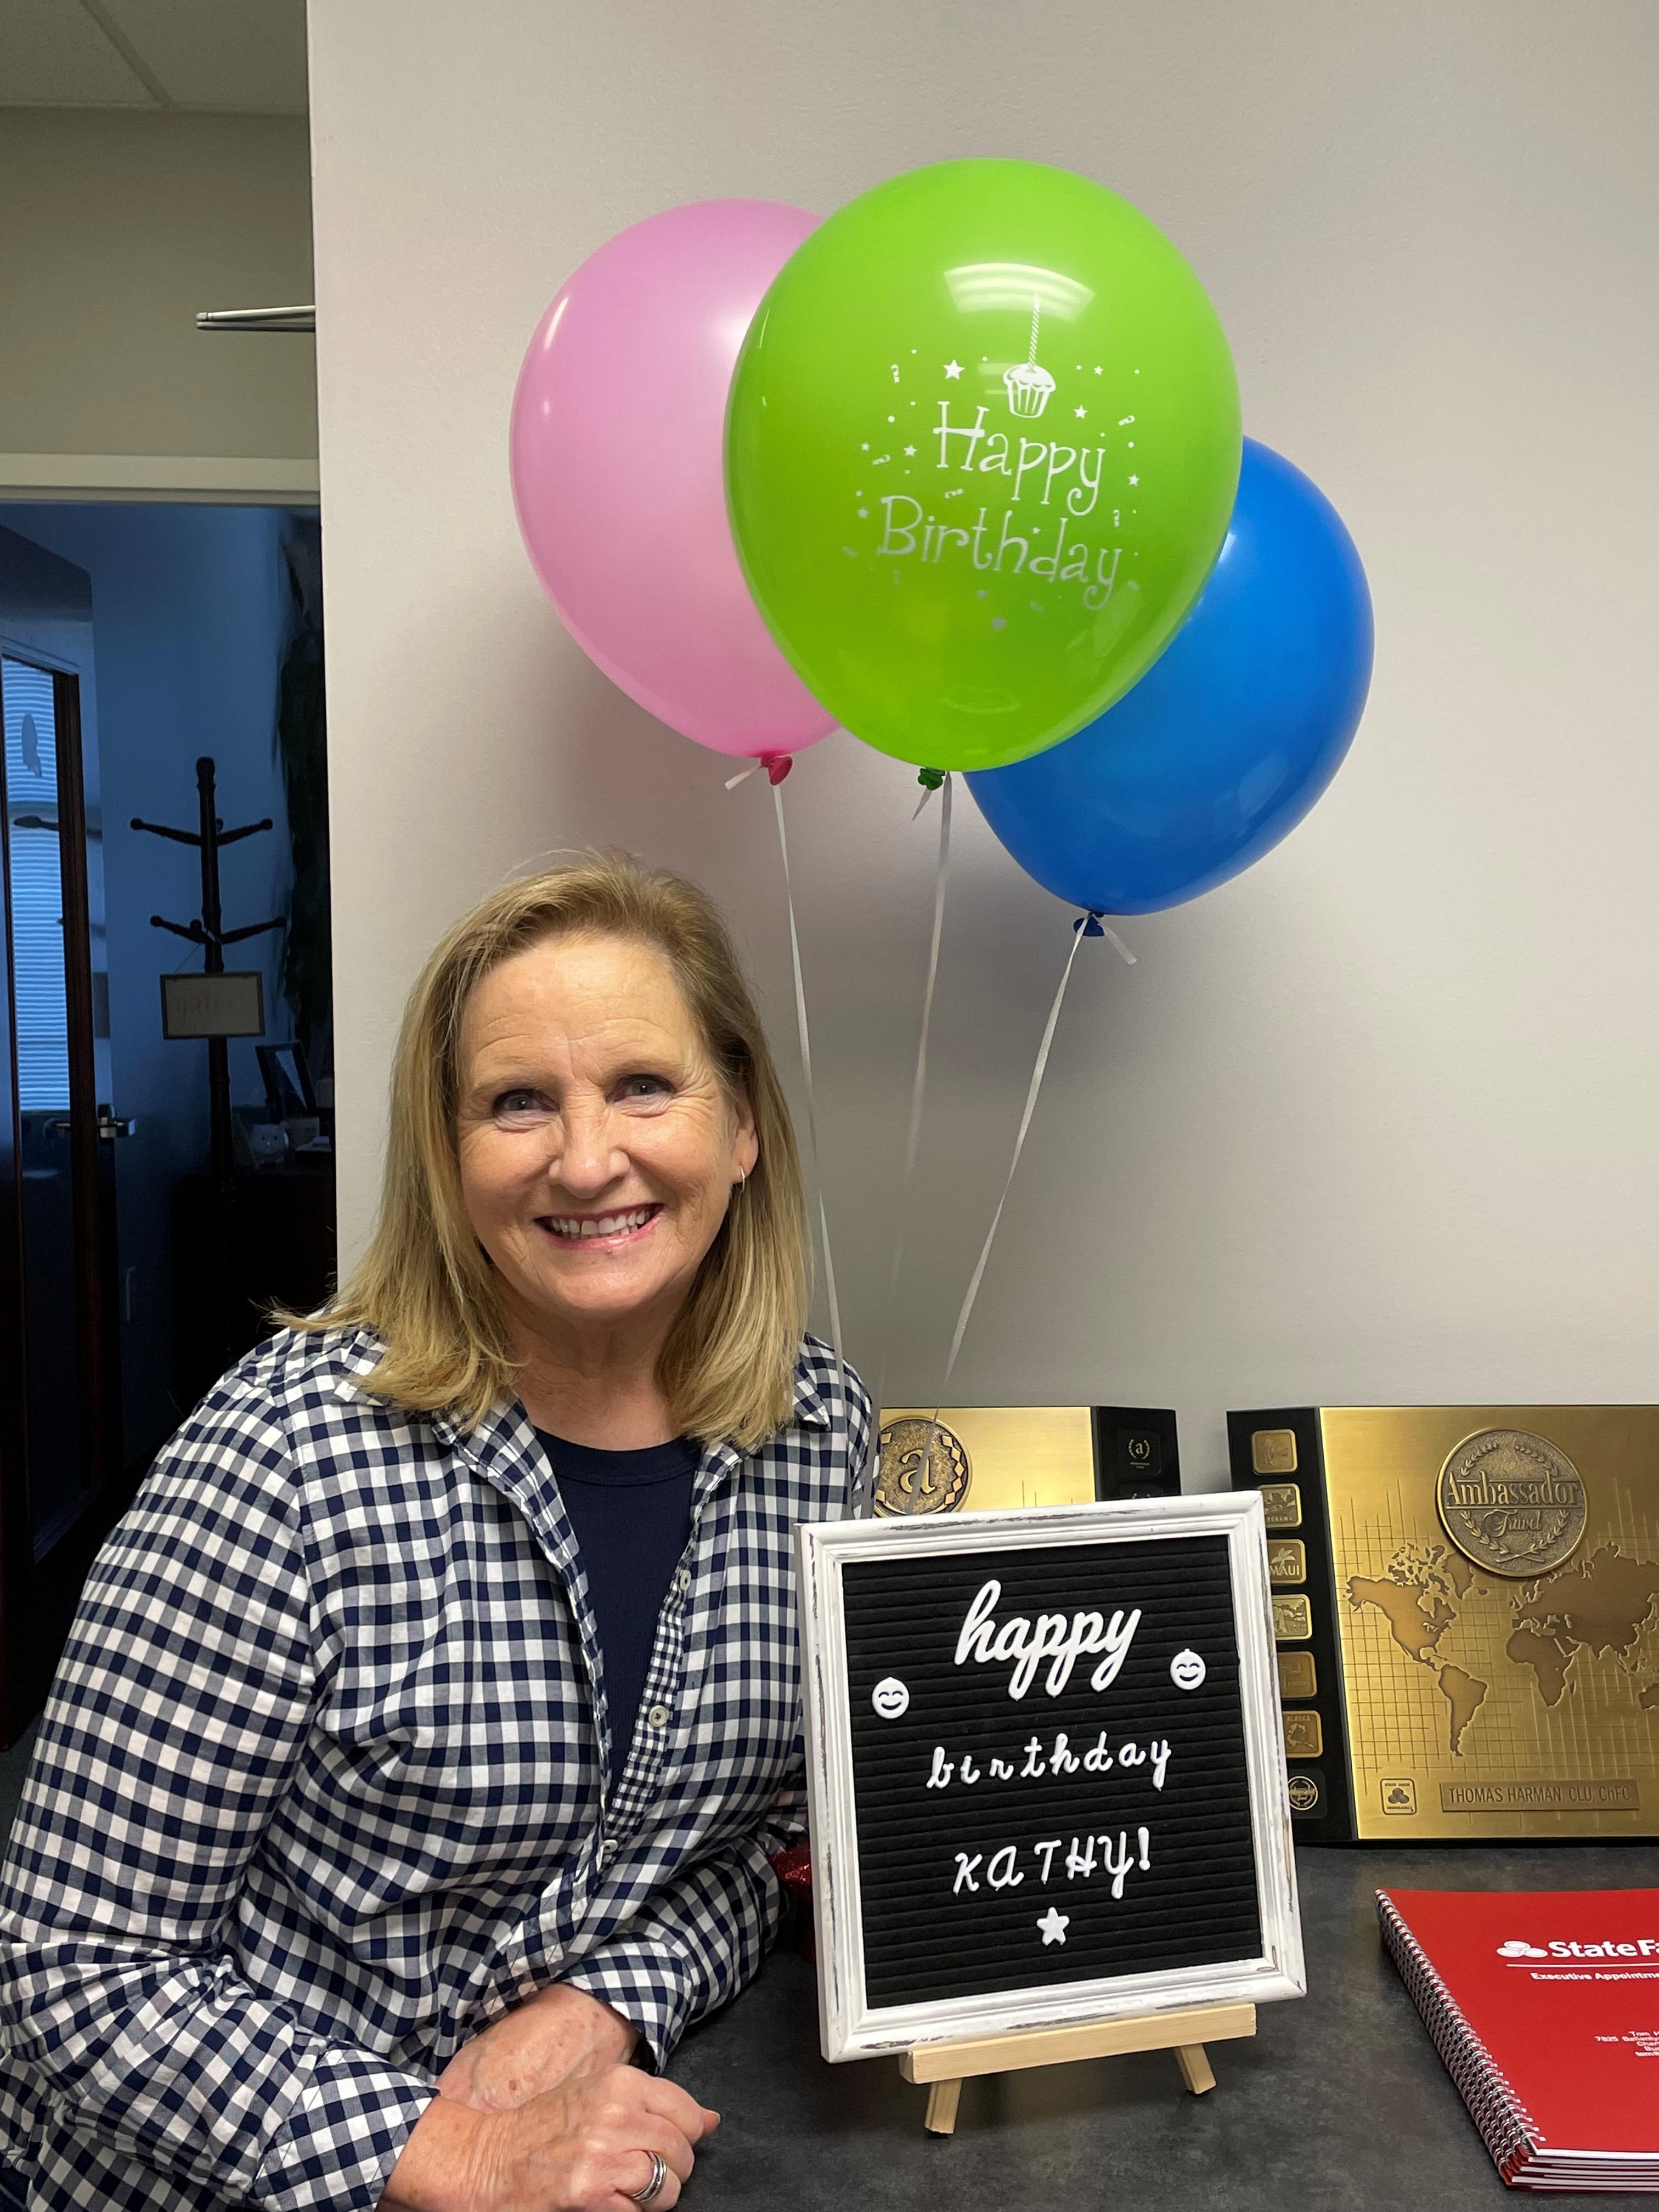 Happy happy birthday to Kathy Schmied! I hope you have a wonderful day and weekend celebrating you!